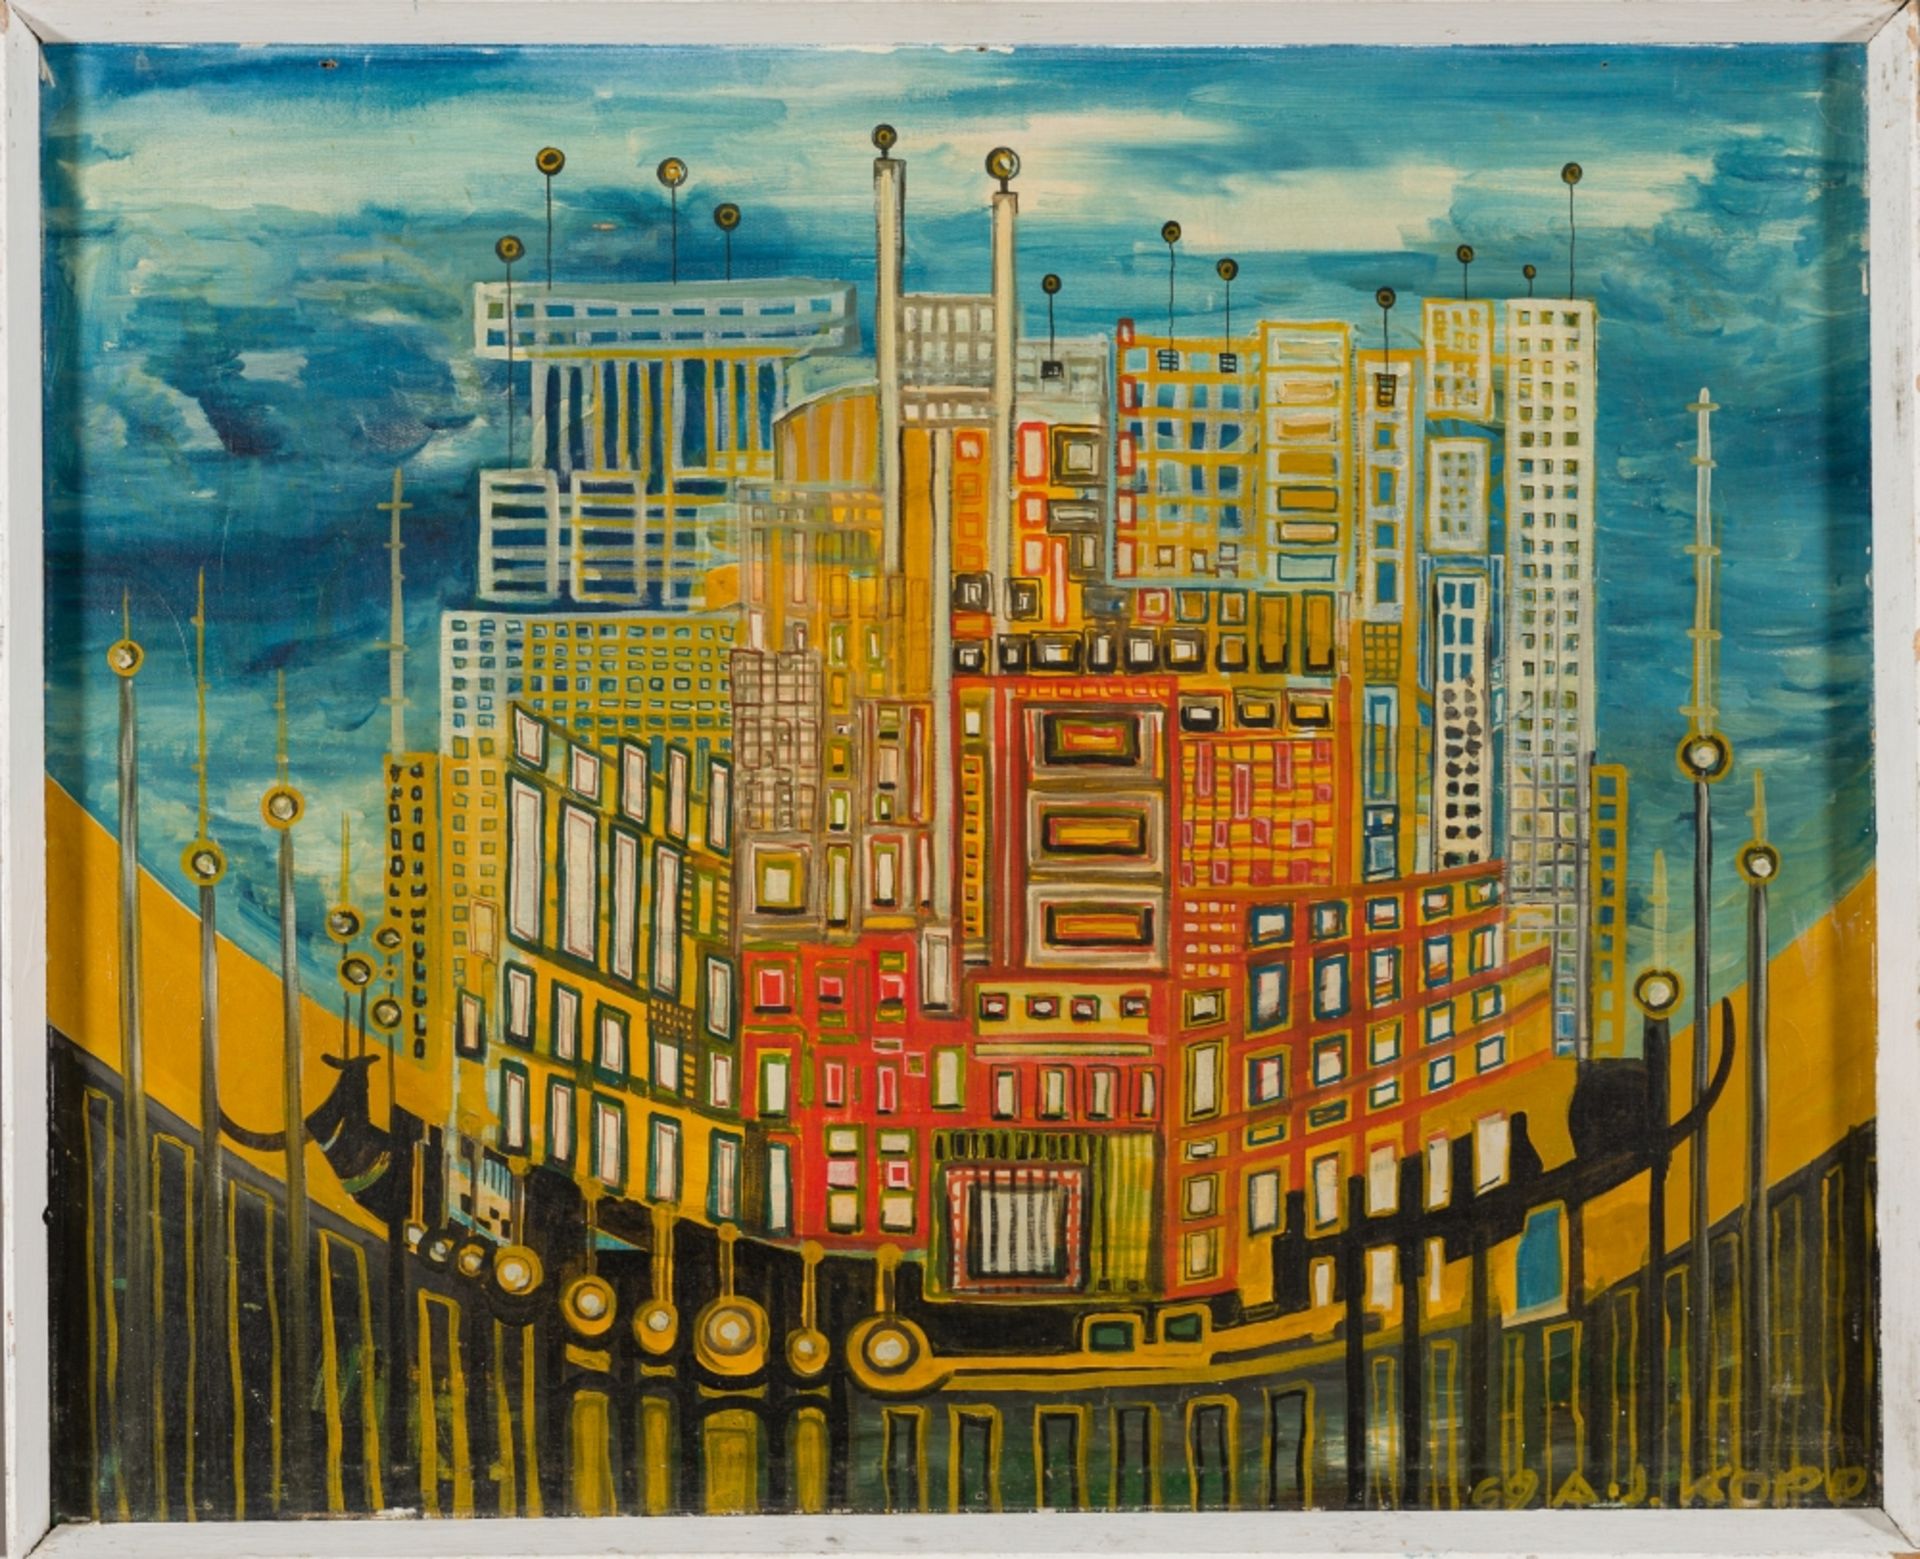 Kopp, A. J.Futuristic City, (19)69Oil on CanvasSigned and dated lower right25,5 x 31,7 inFramed - Image 2 of 4